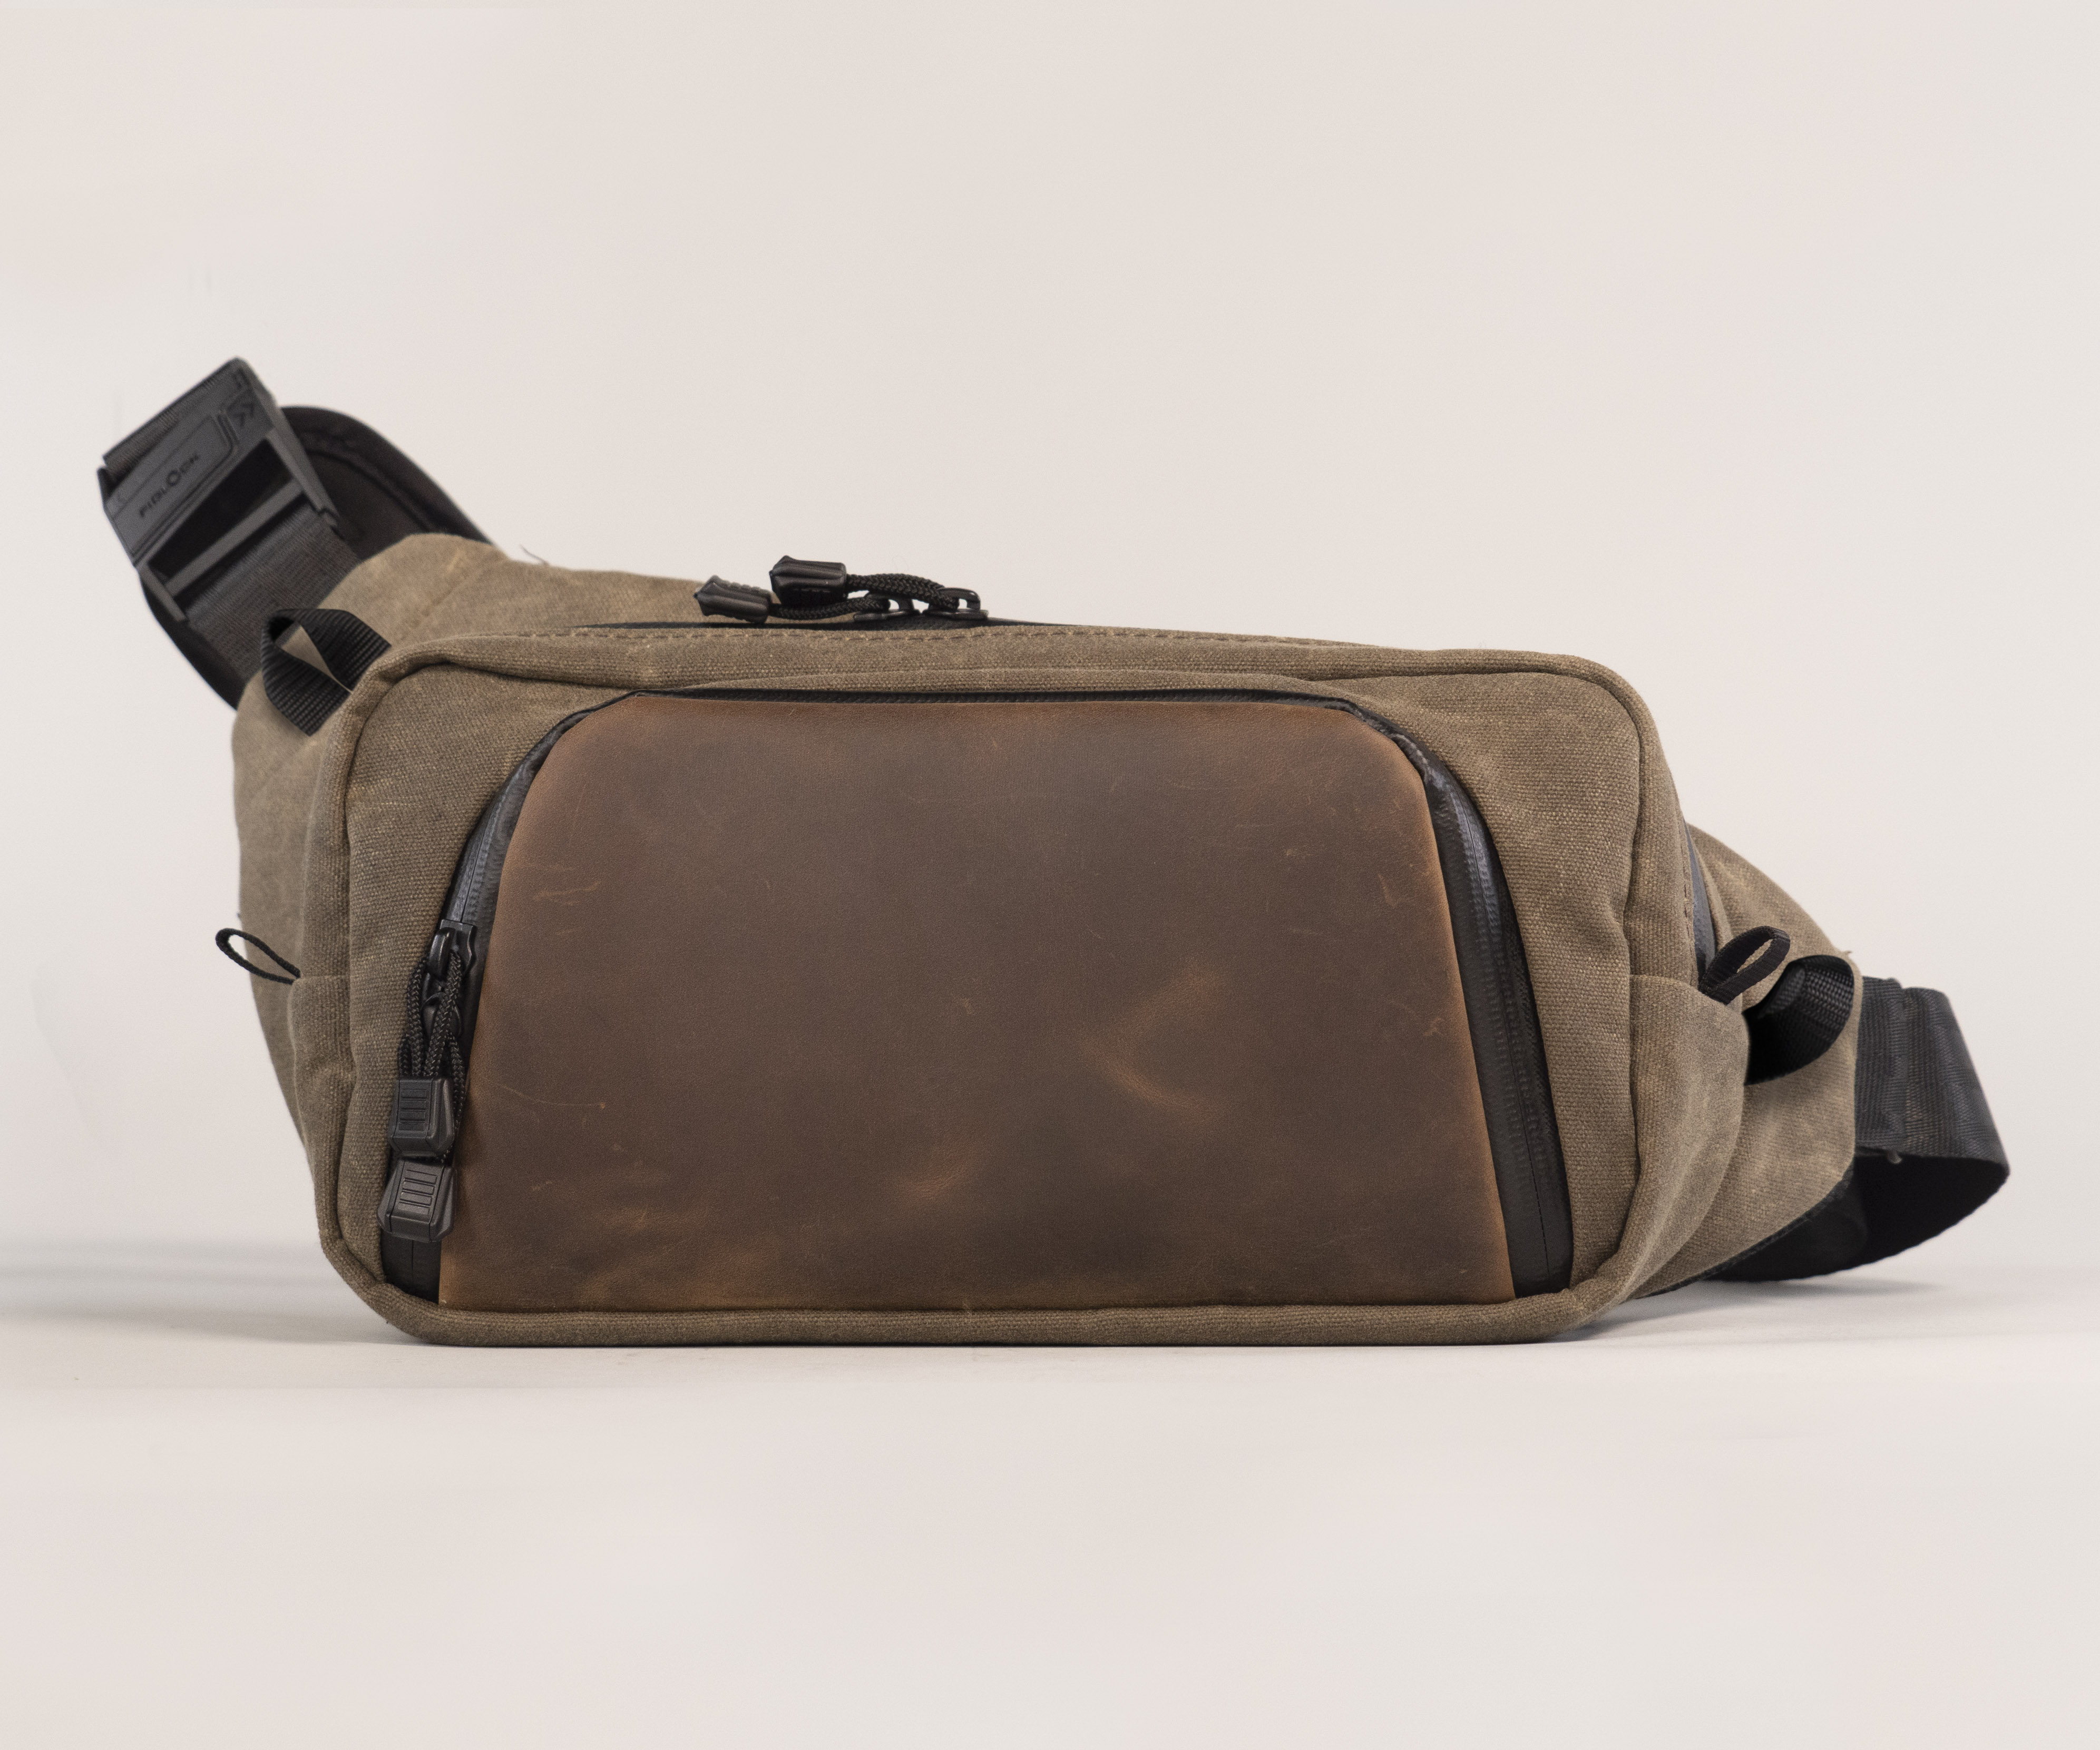 Moto Sling in waxed canvas and full-grain chocolate leather